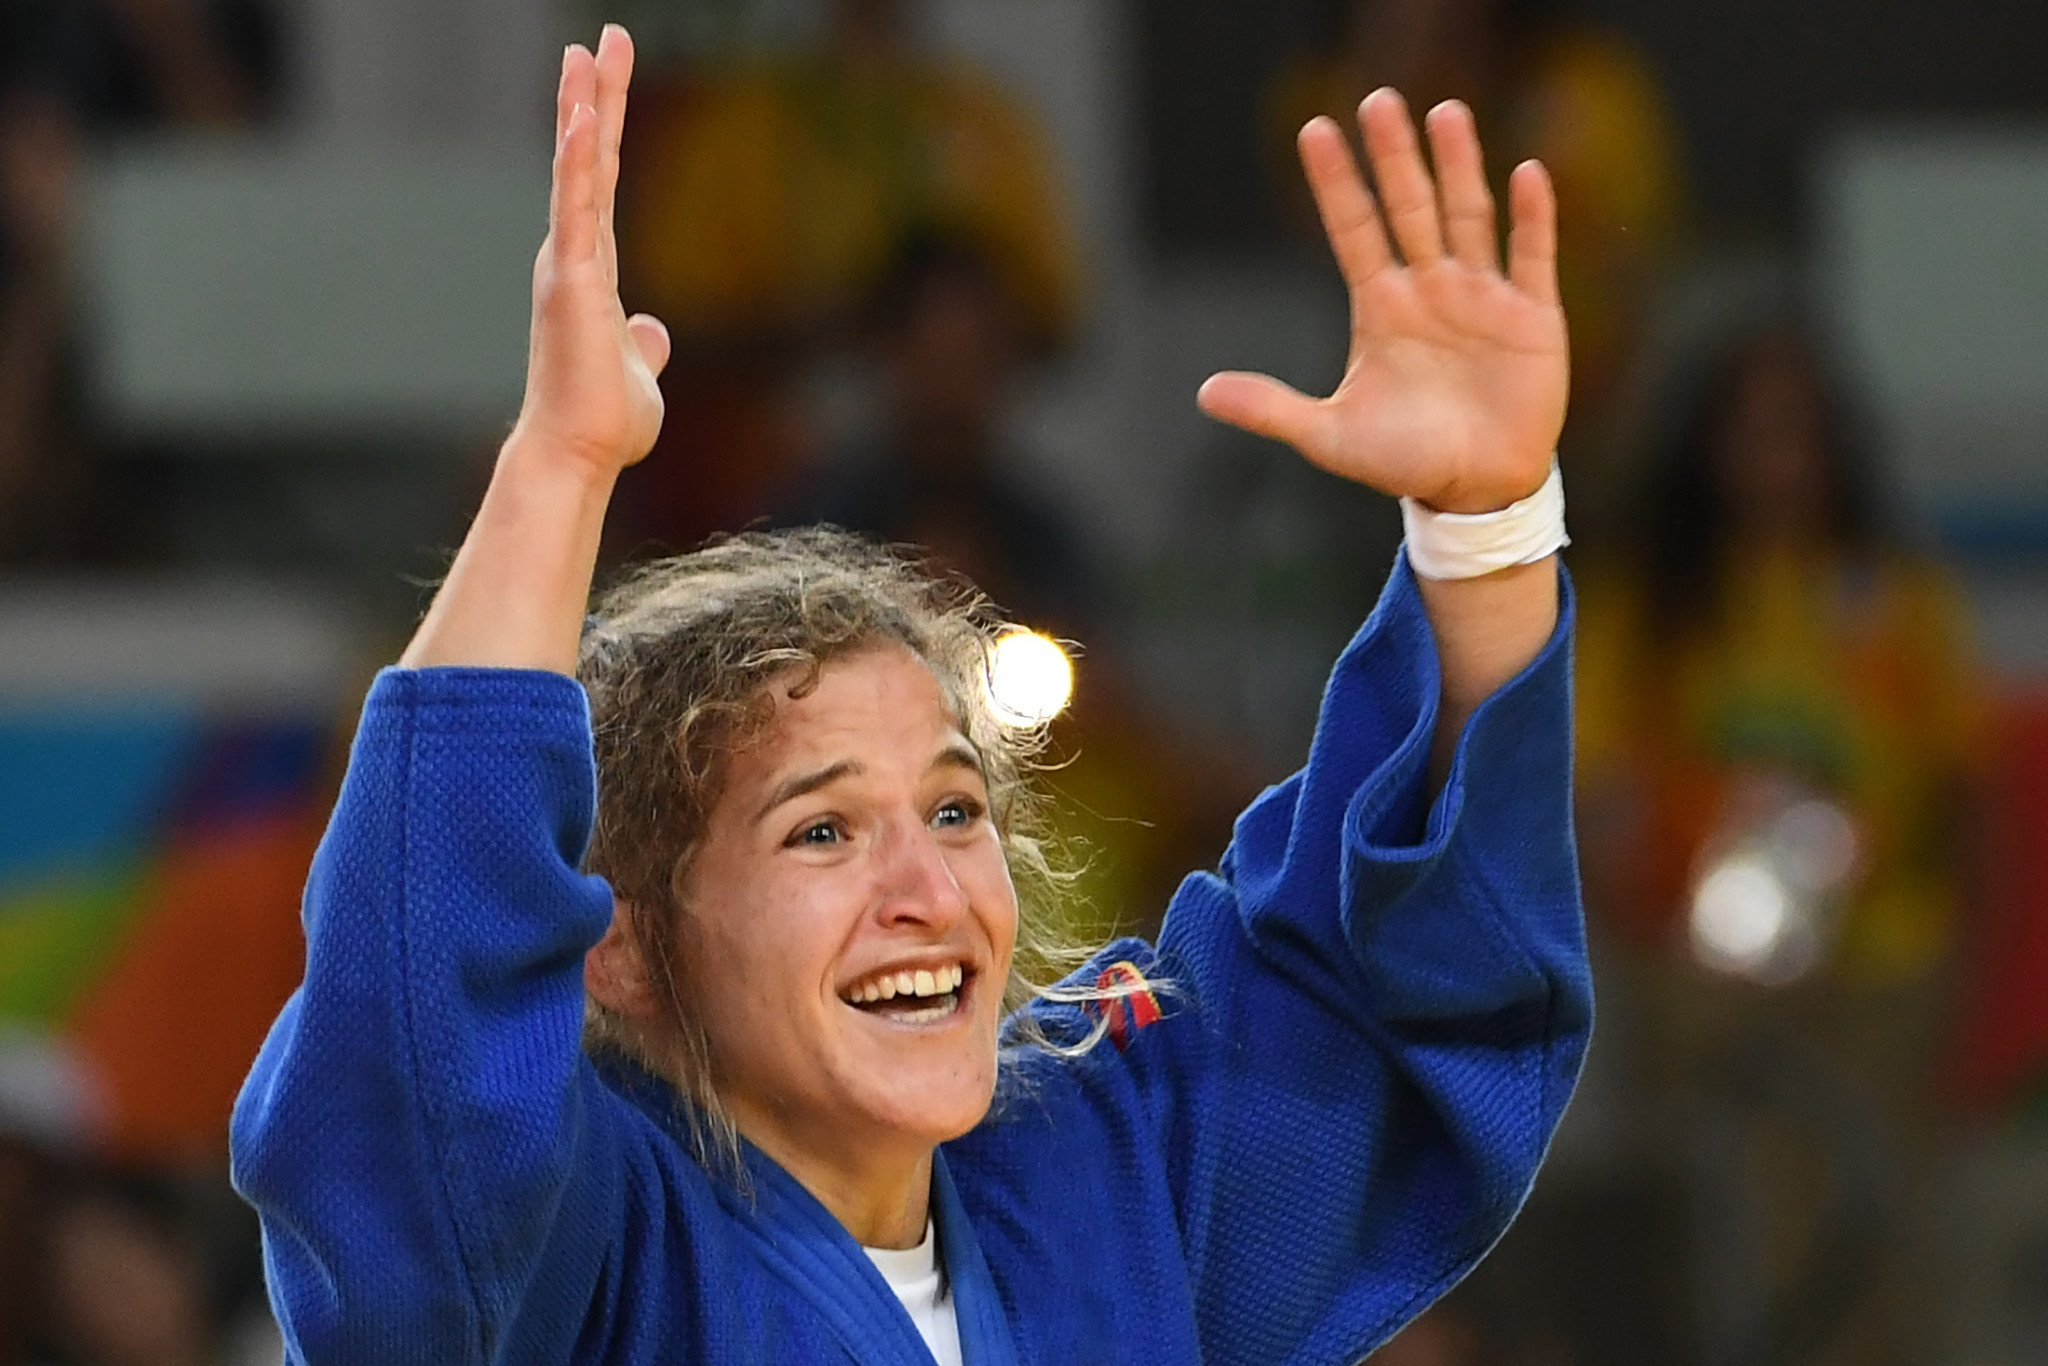 Olympic and world champions descend on Abu Dhabi for latest IJF Grand Slam